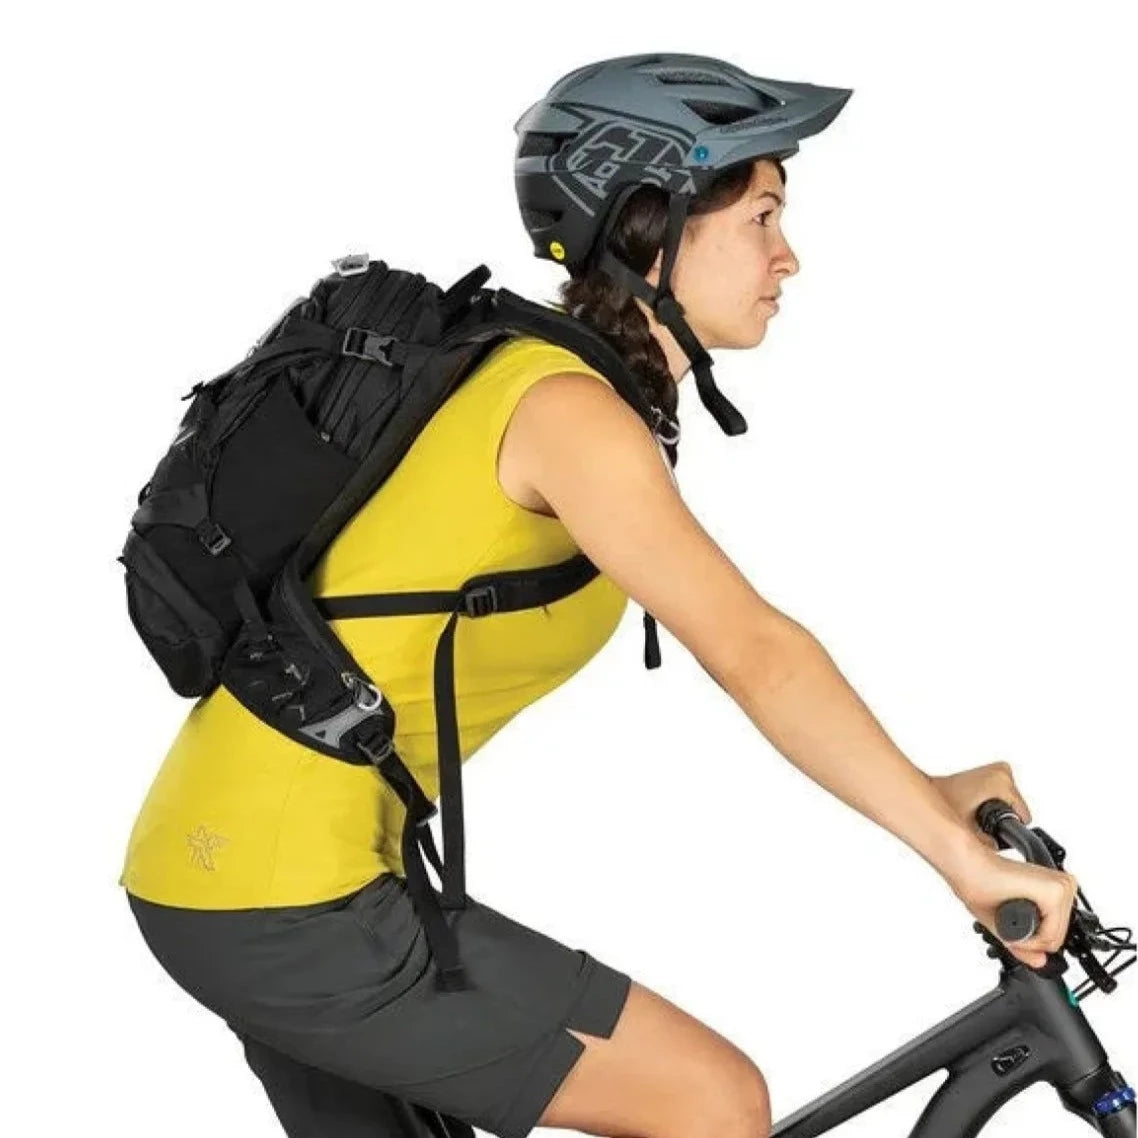 Rider displaying the Osprey Raven 14 backpack attached to her back.